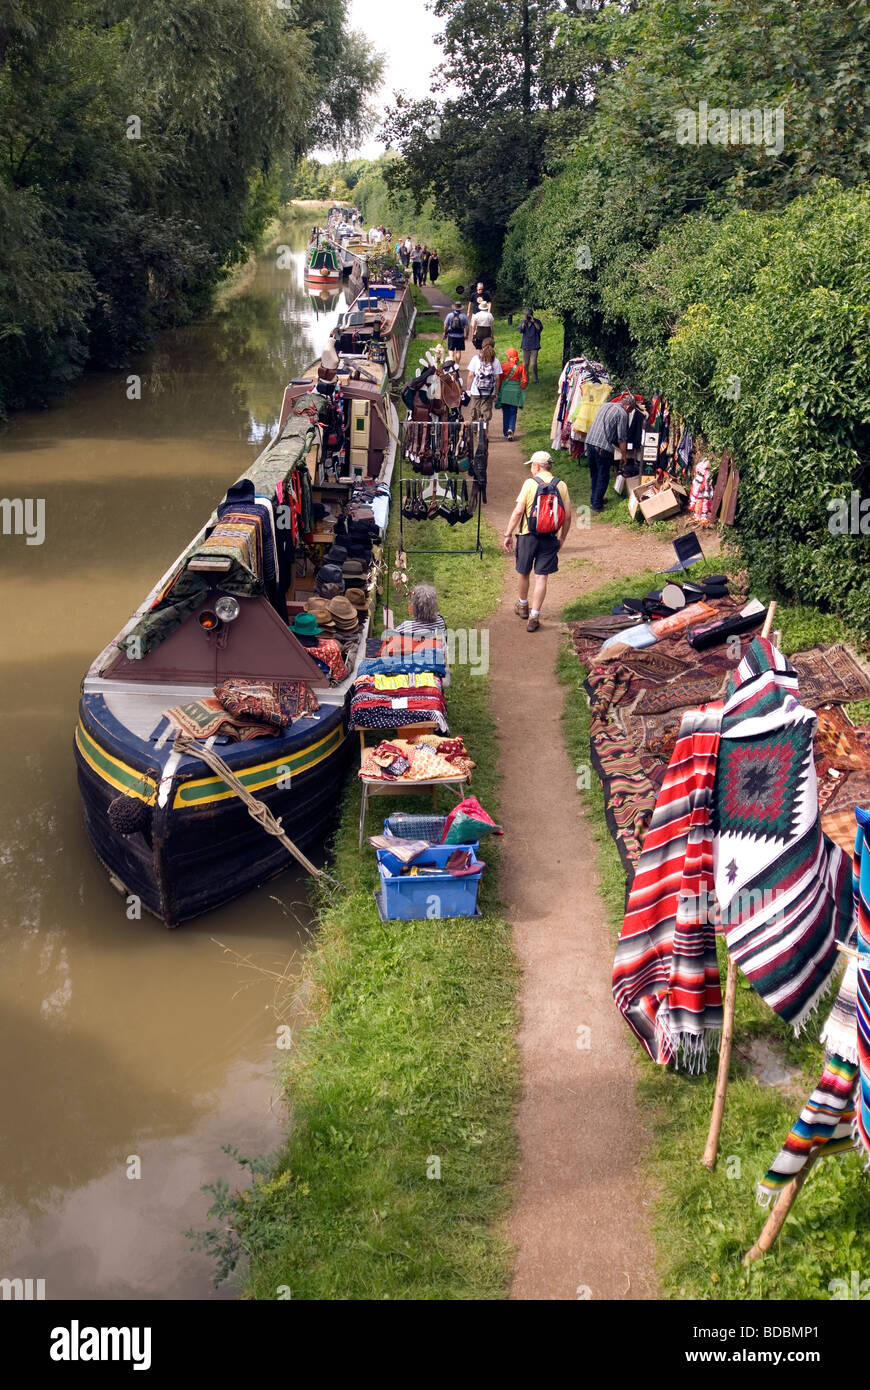 Narrowboats Fairport s Cropredy Convention friendly music festive near Banbury Oxfordshire on the south Oxford canal Stock Photo